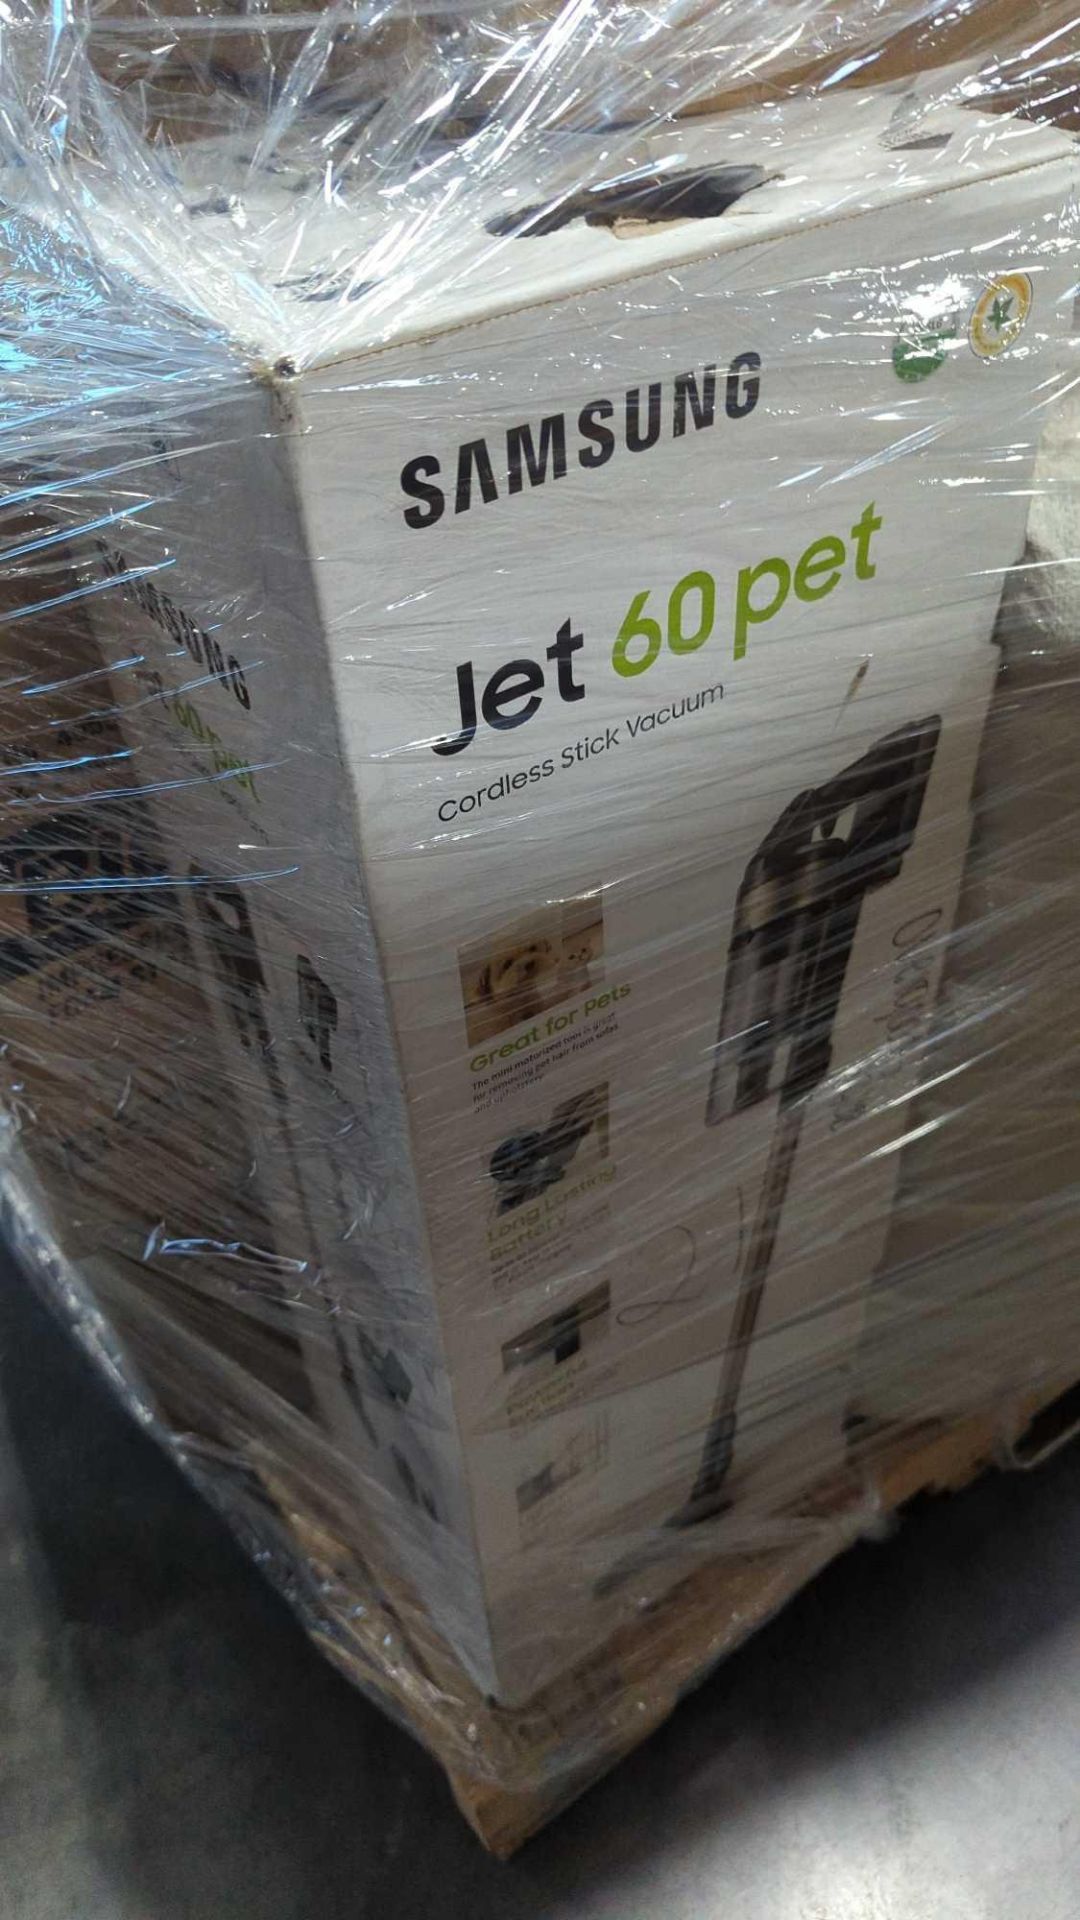 Samsung jet 60 and more - Image 2 of 7